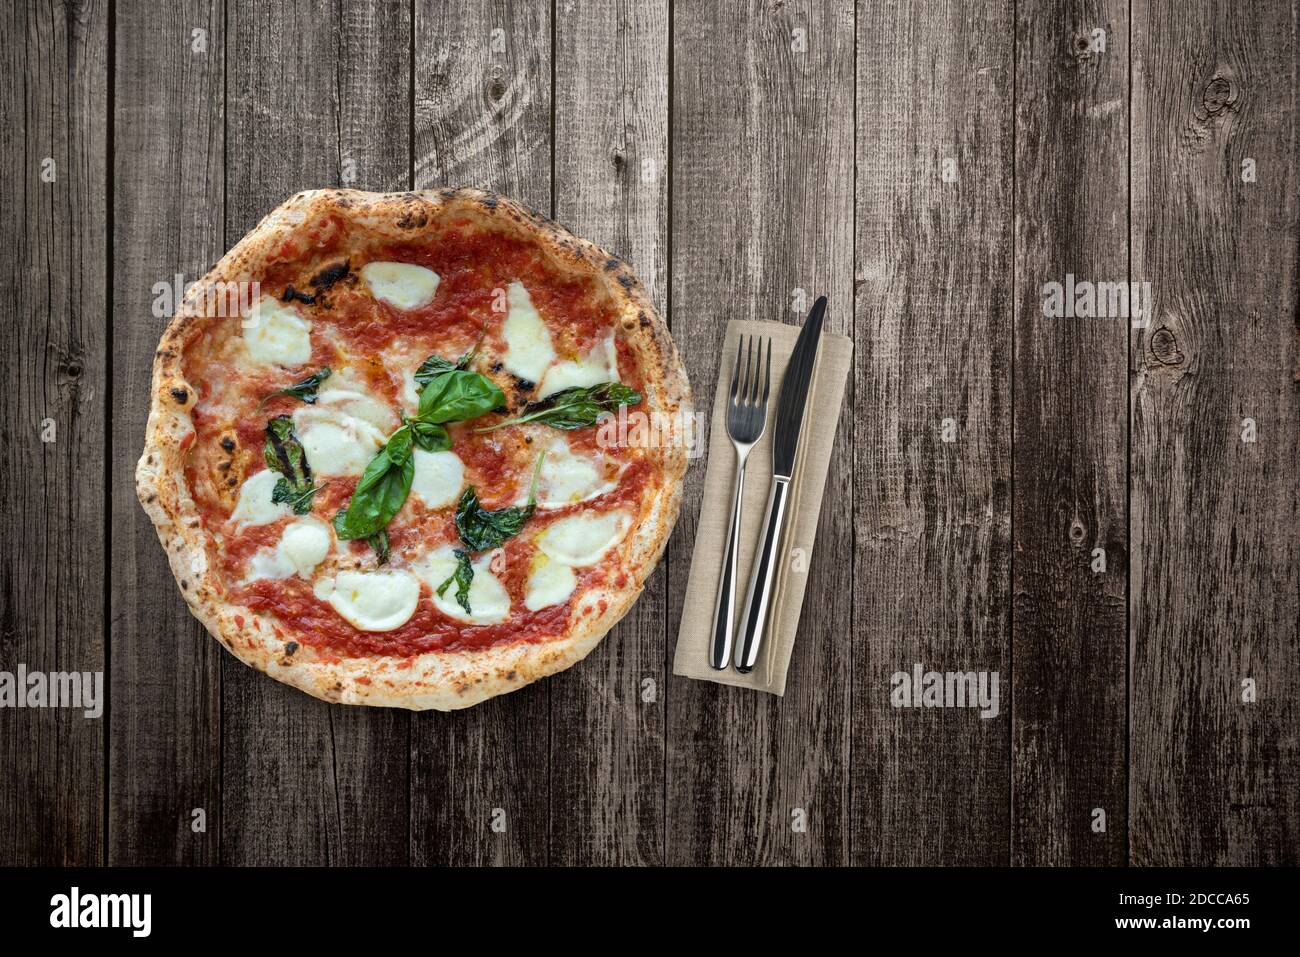 Top view of pizza on wooden table with cutlery Stock Photo